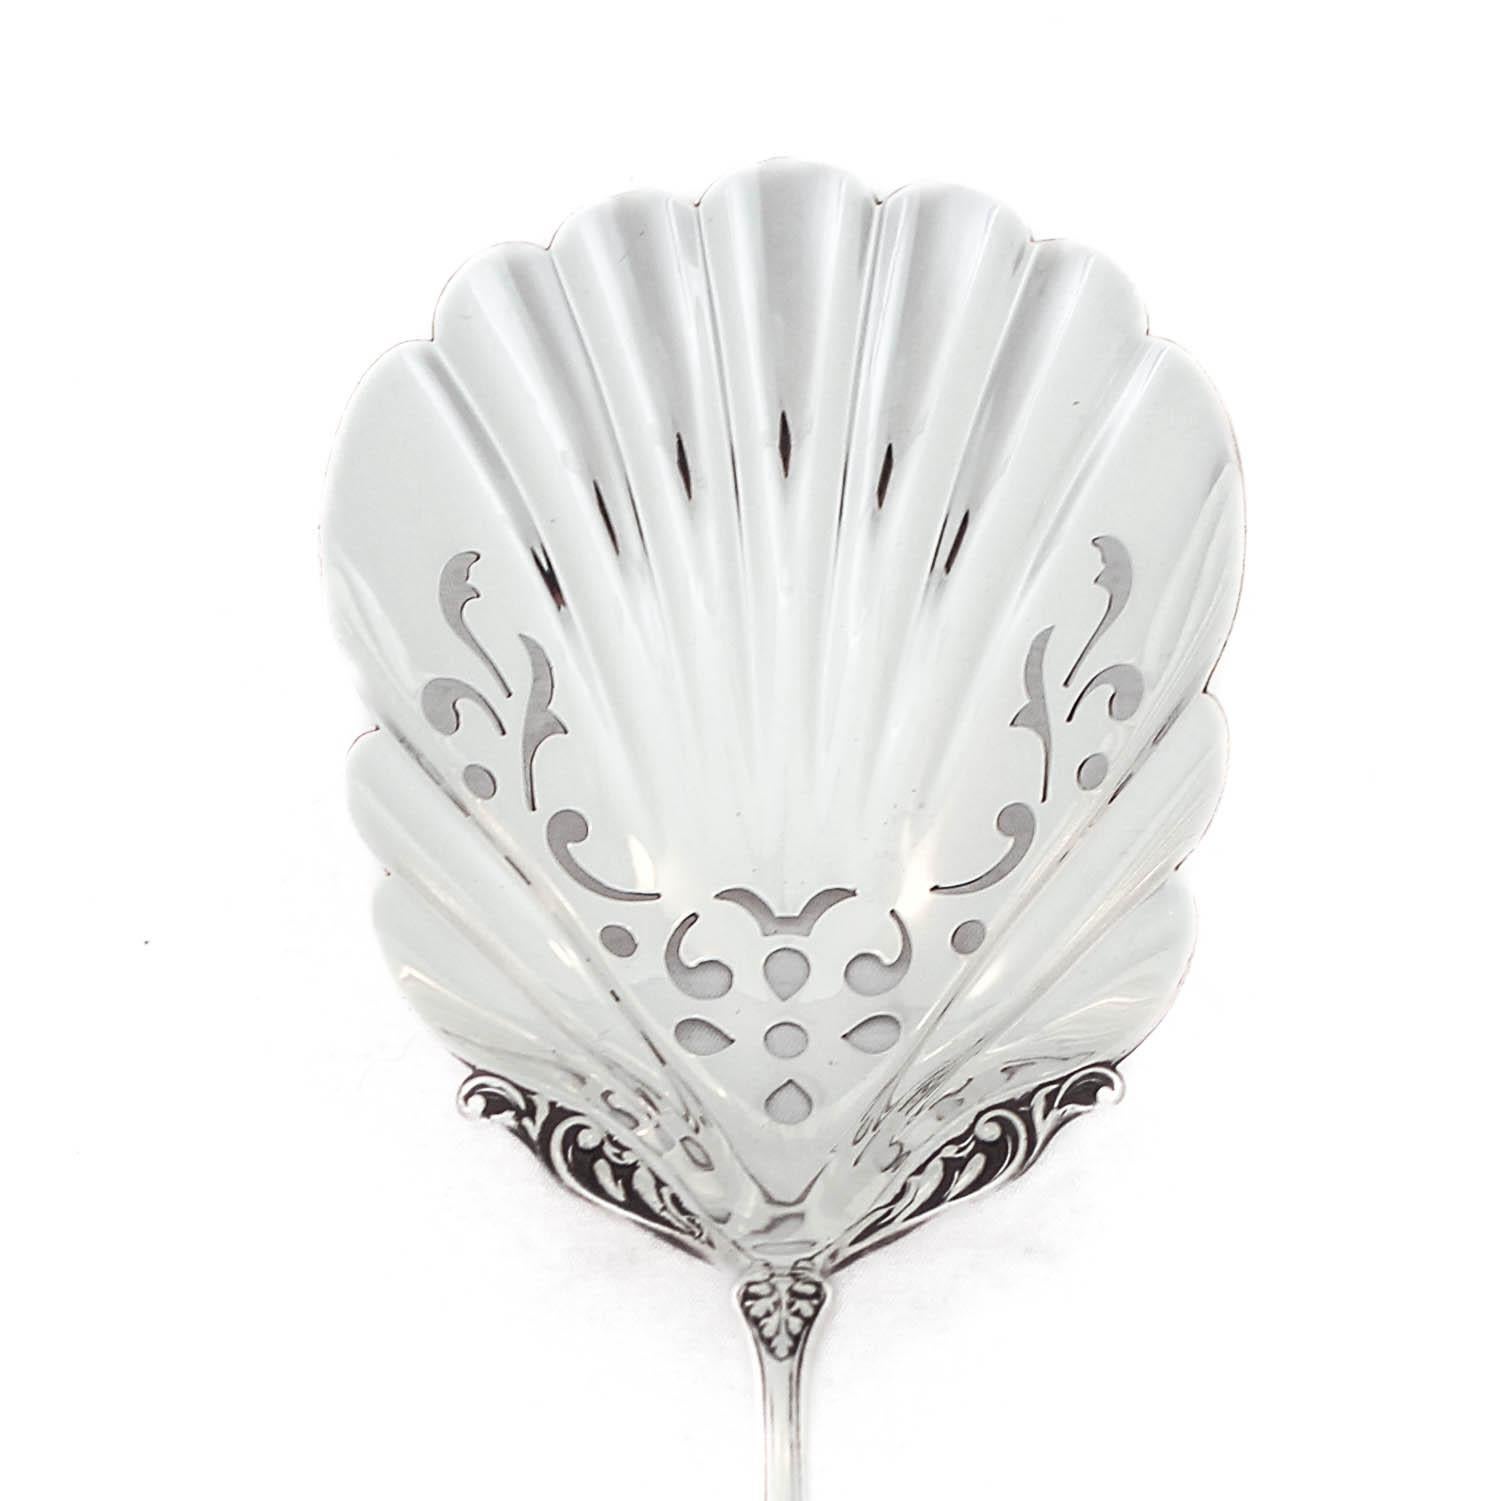 Being offered is a sterling silver serving spoon by Gorham Silversmiths in the “Maryland” pattern, hallmarked 1885.  The handle has a floral motif, not etched but raised.  The bowl is rather deep, scalloped, and has a cutout design.  This is